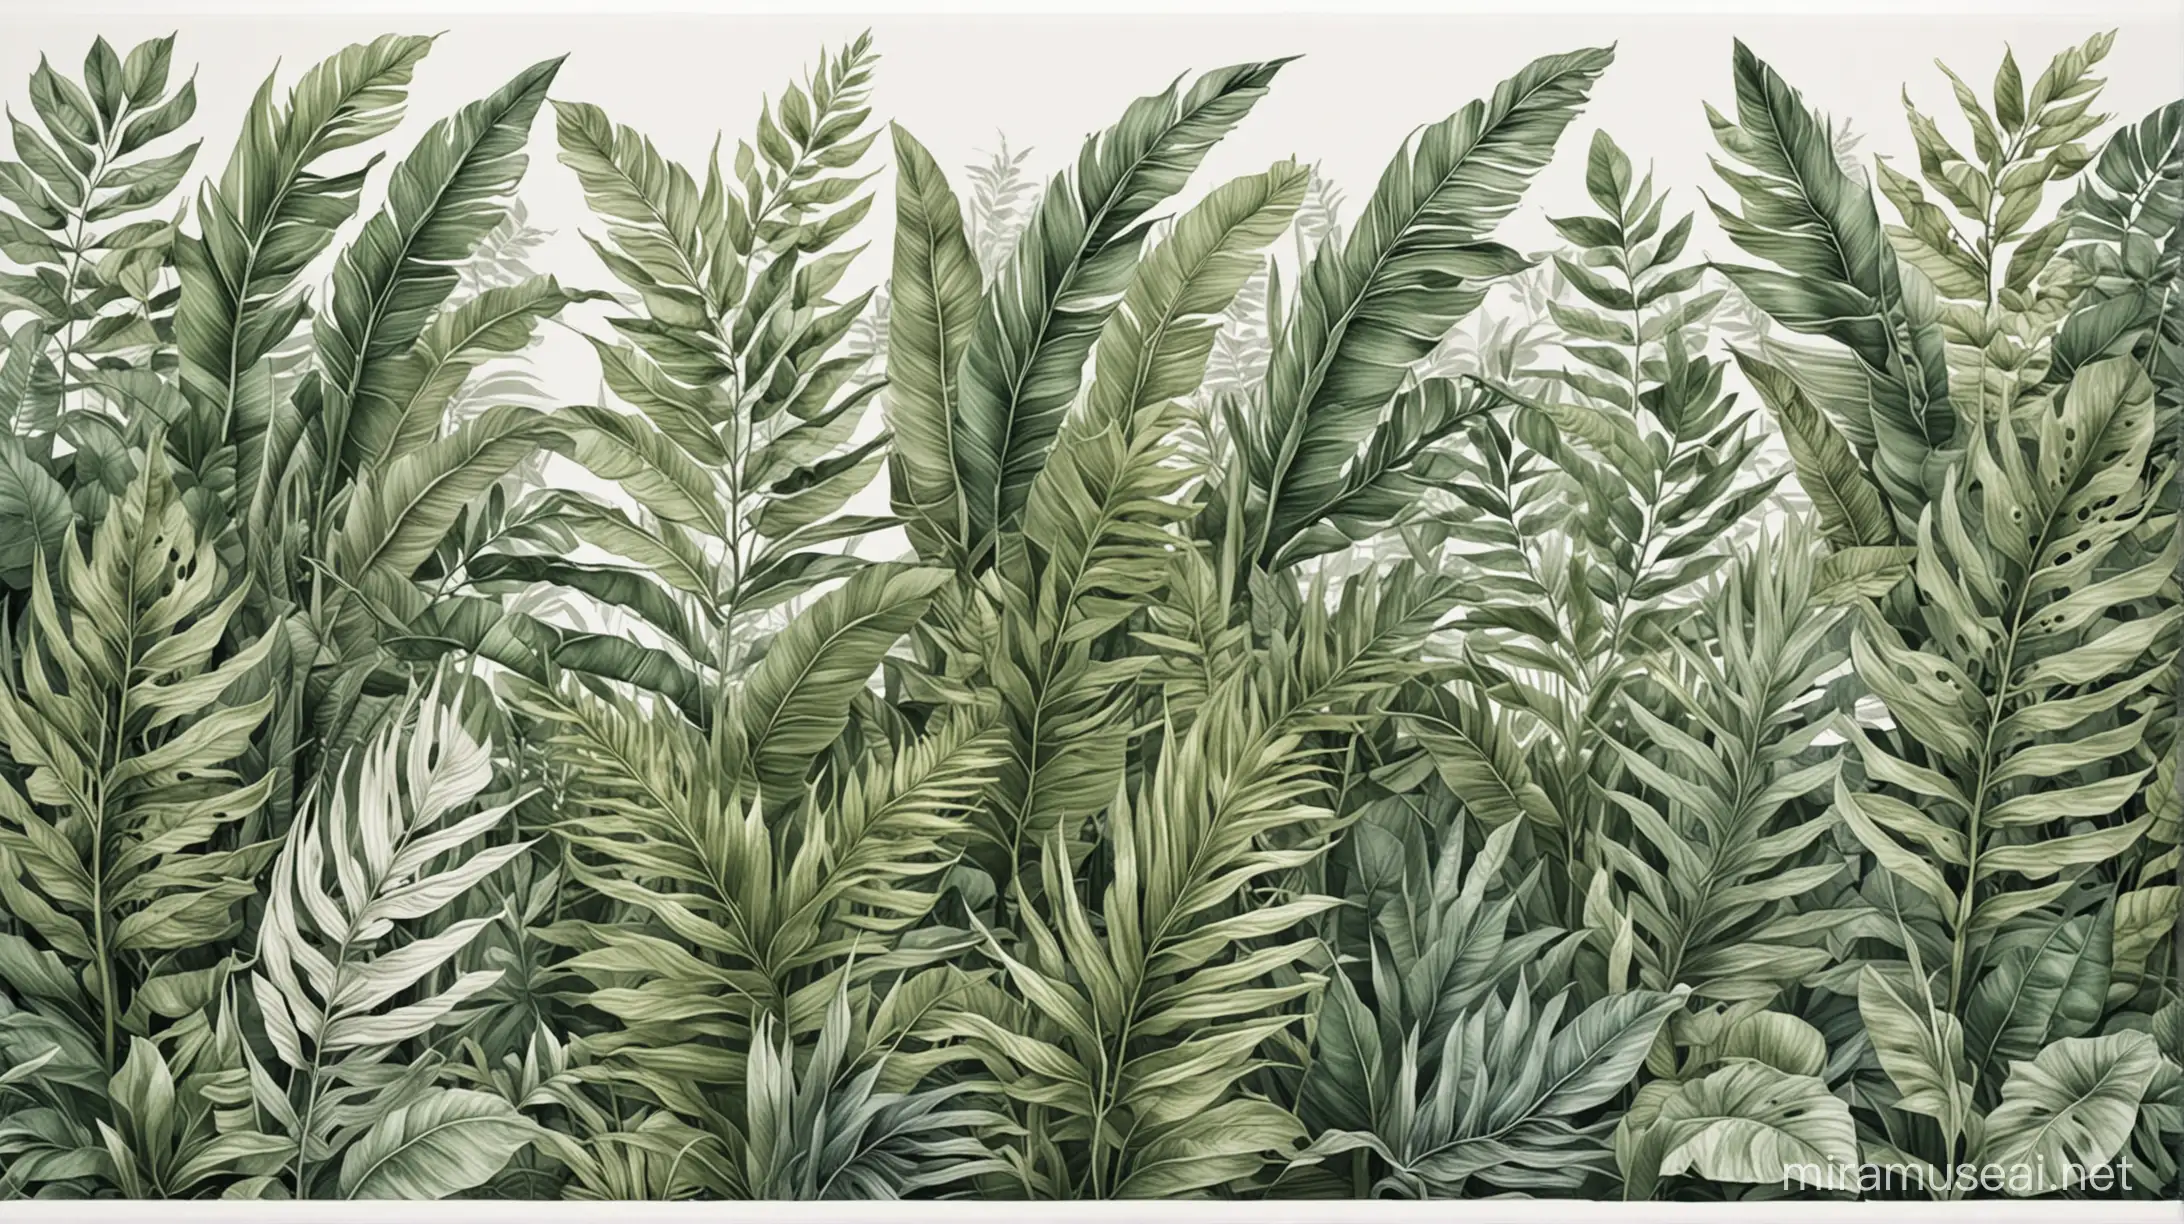 Tropical Jungle Foliage in Horizontal Line HandDrawn Art with Muted Colors